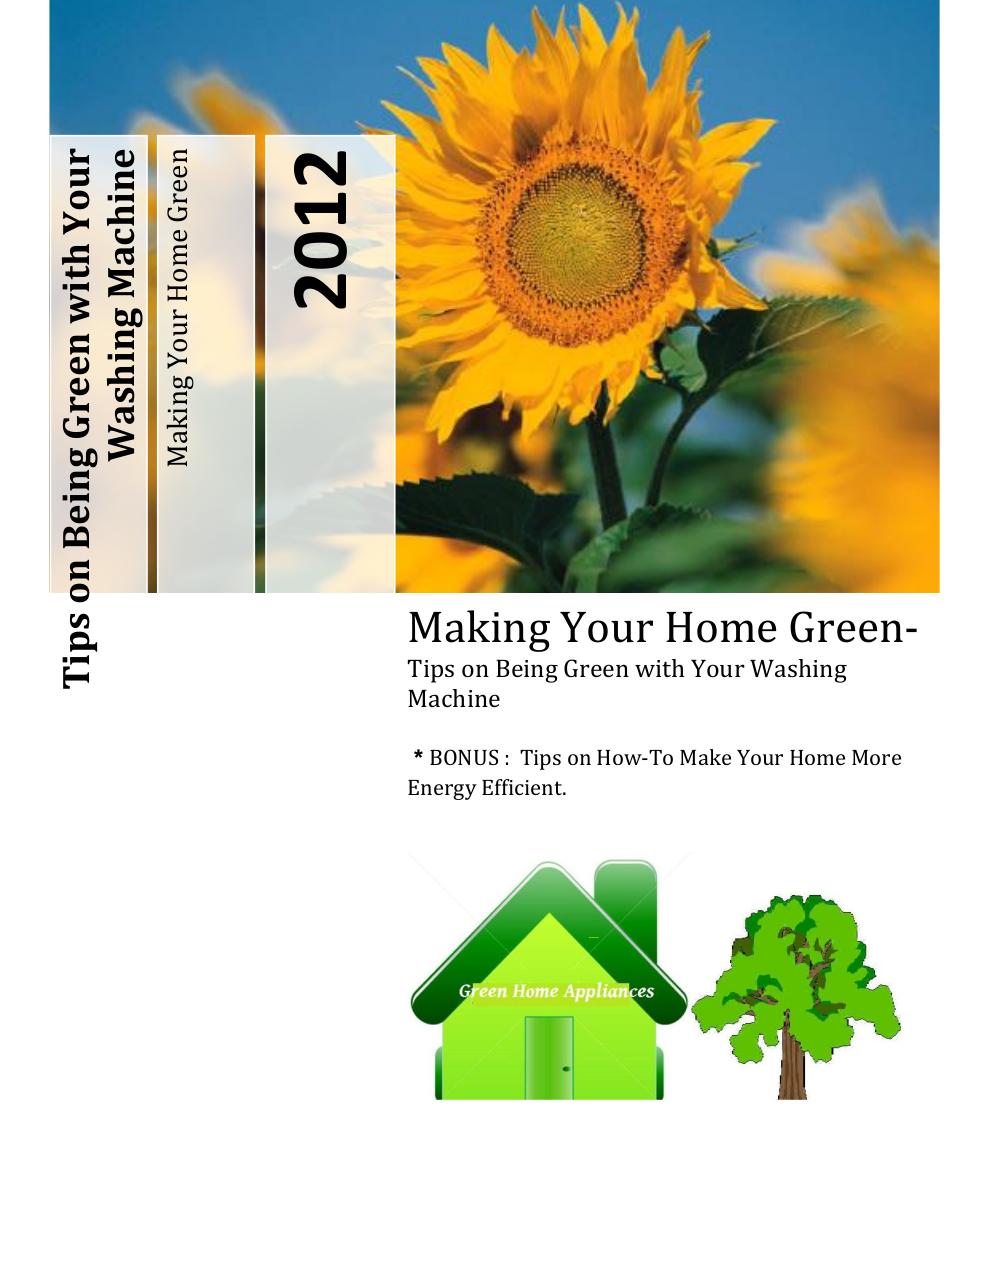 How To Be Green With Your Washing Machine.pdf - page 1/11